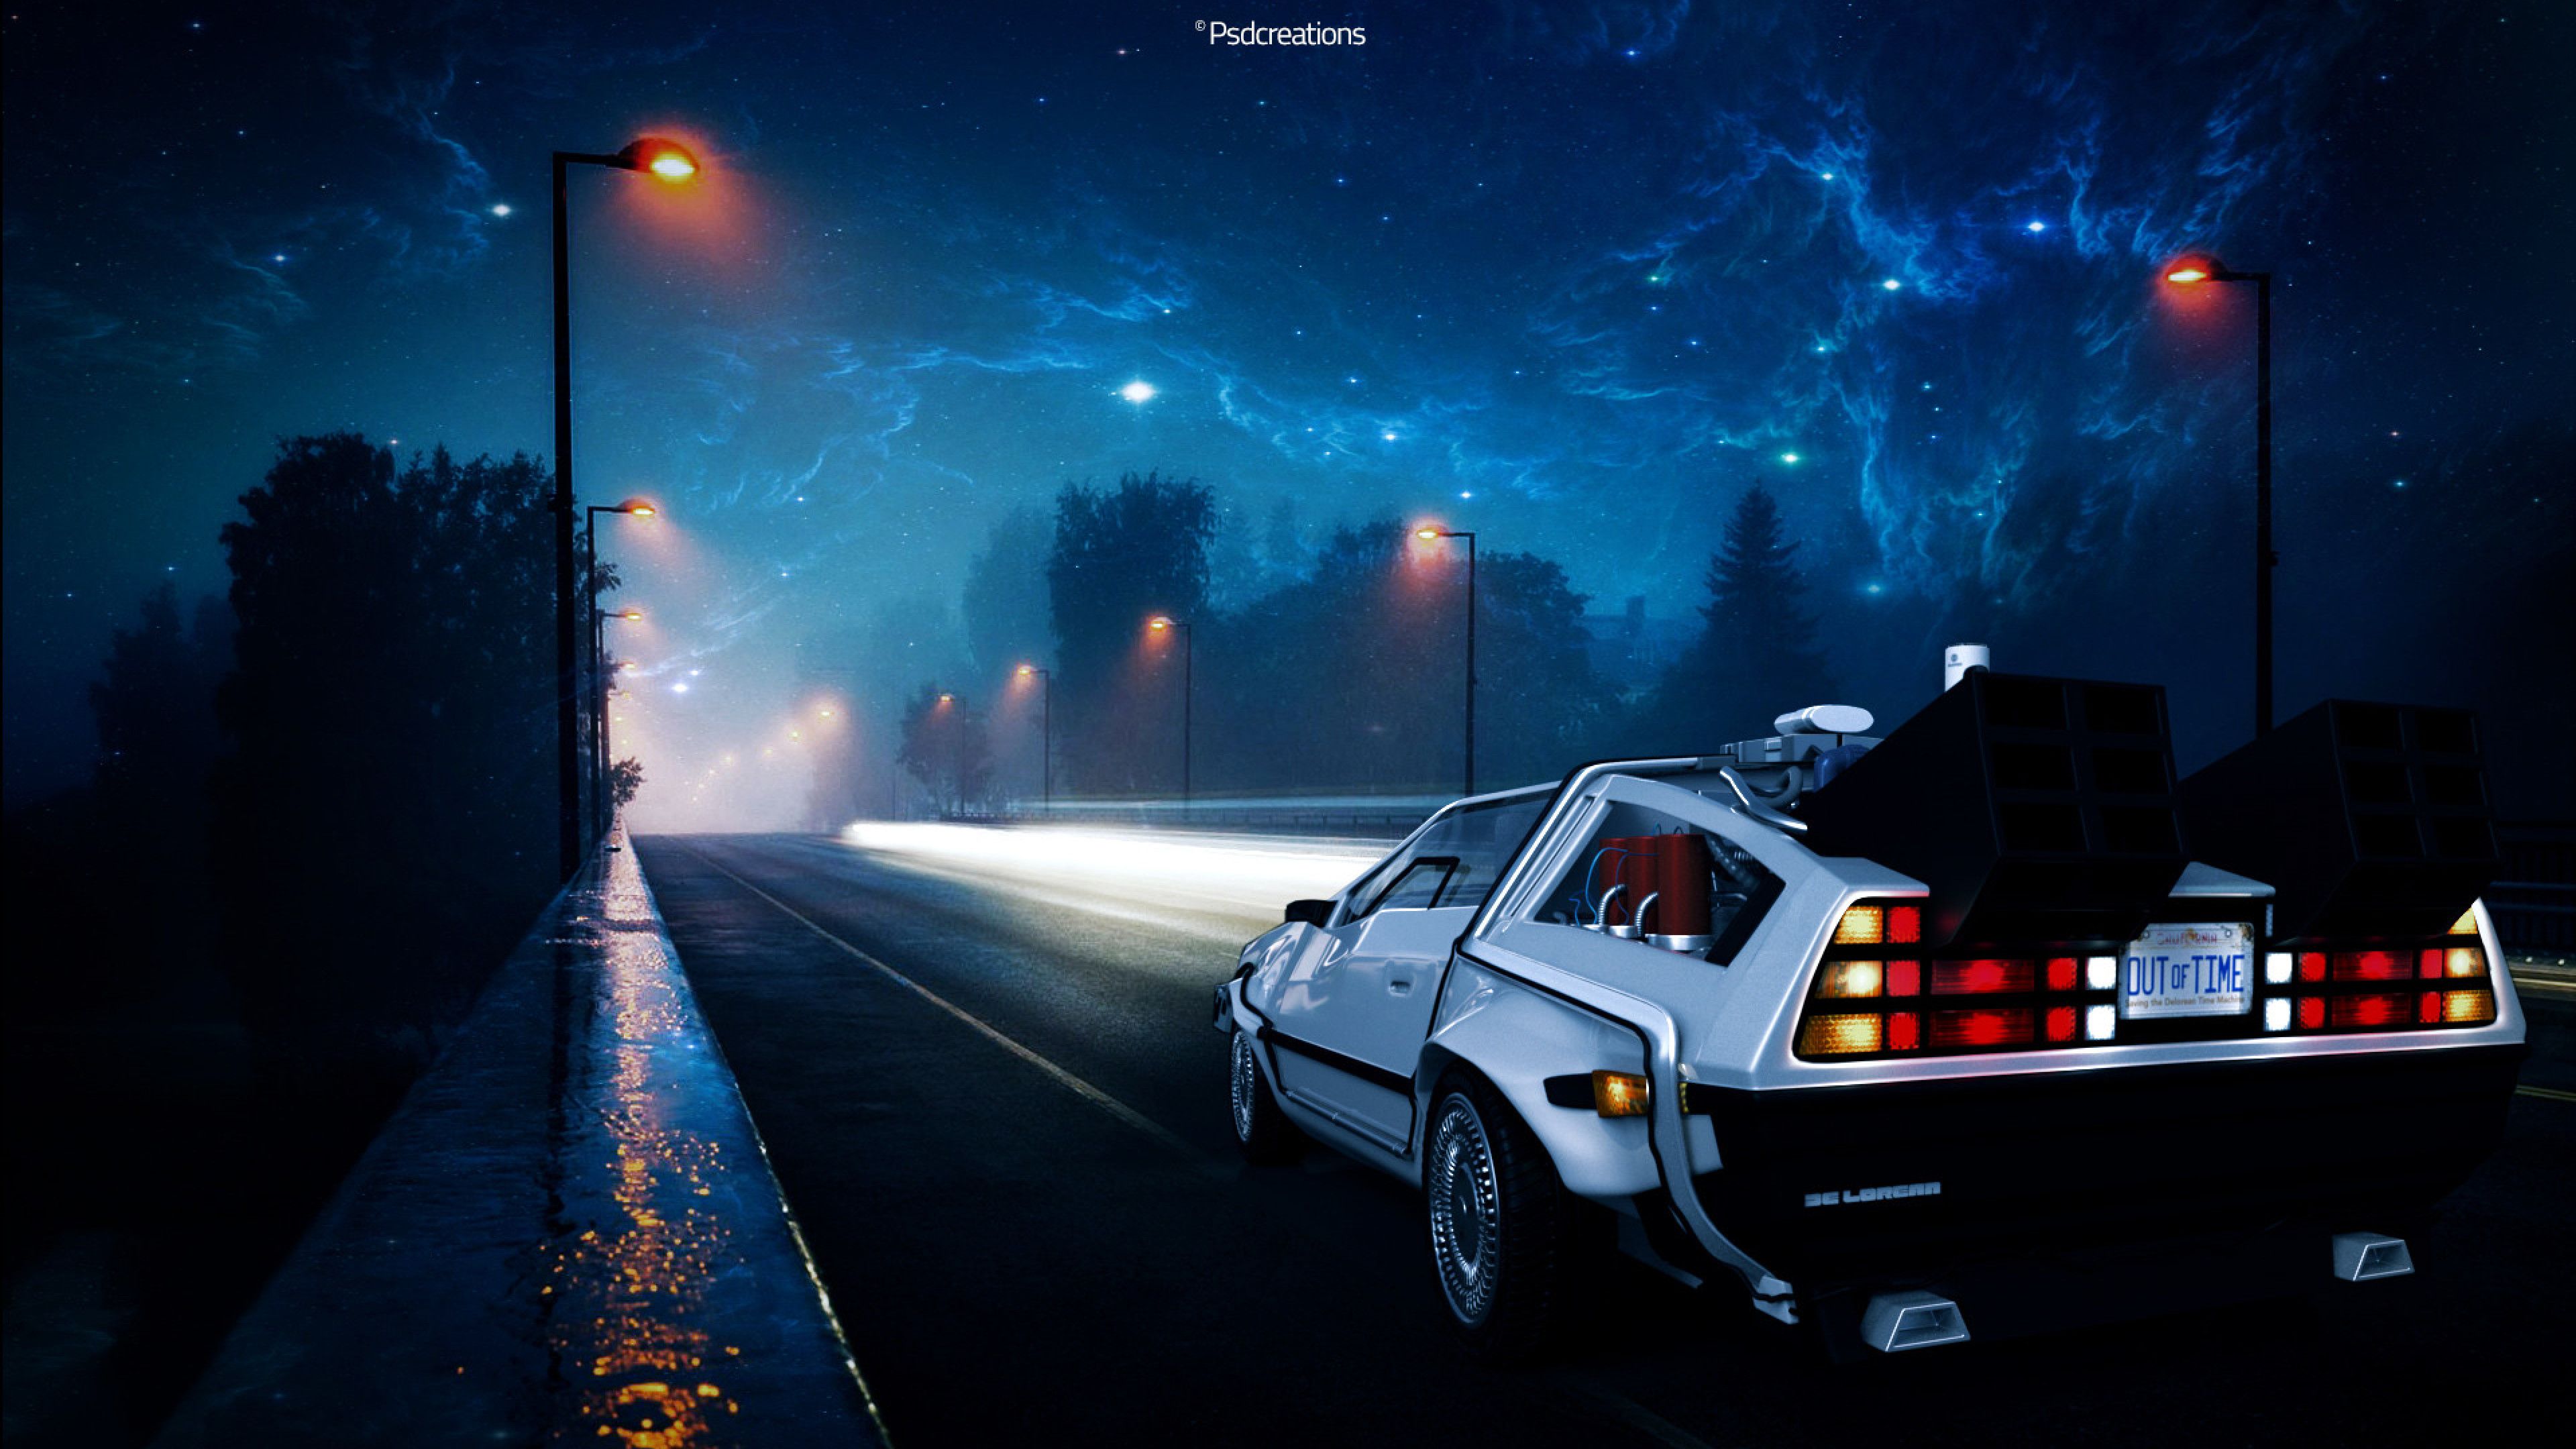 Back to the Future DeLorean Car Illustration 4K Wallpaper, HD Cars 4K Wallpaper, Image, Photo and Background